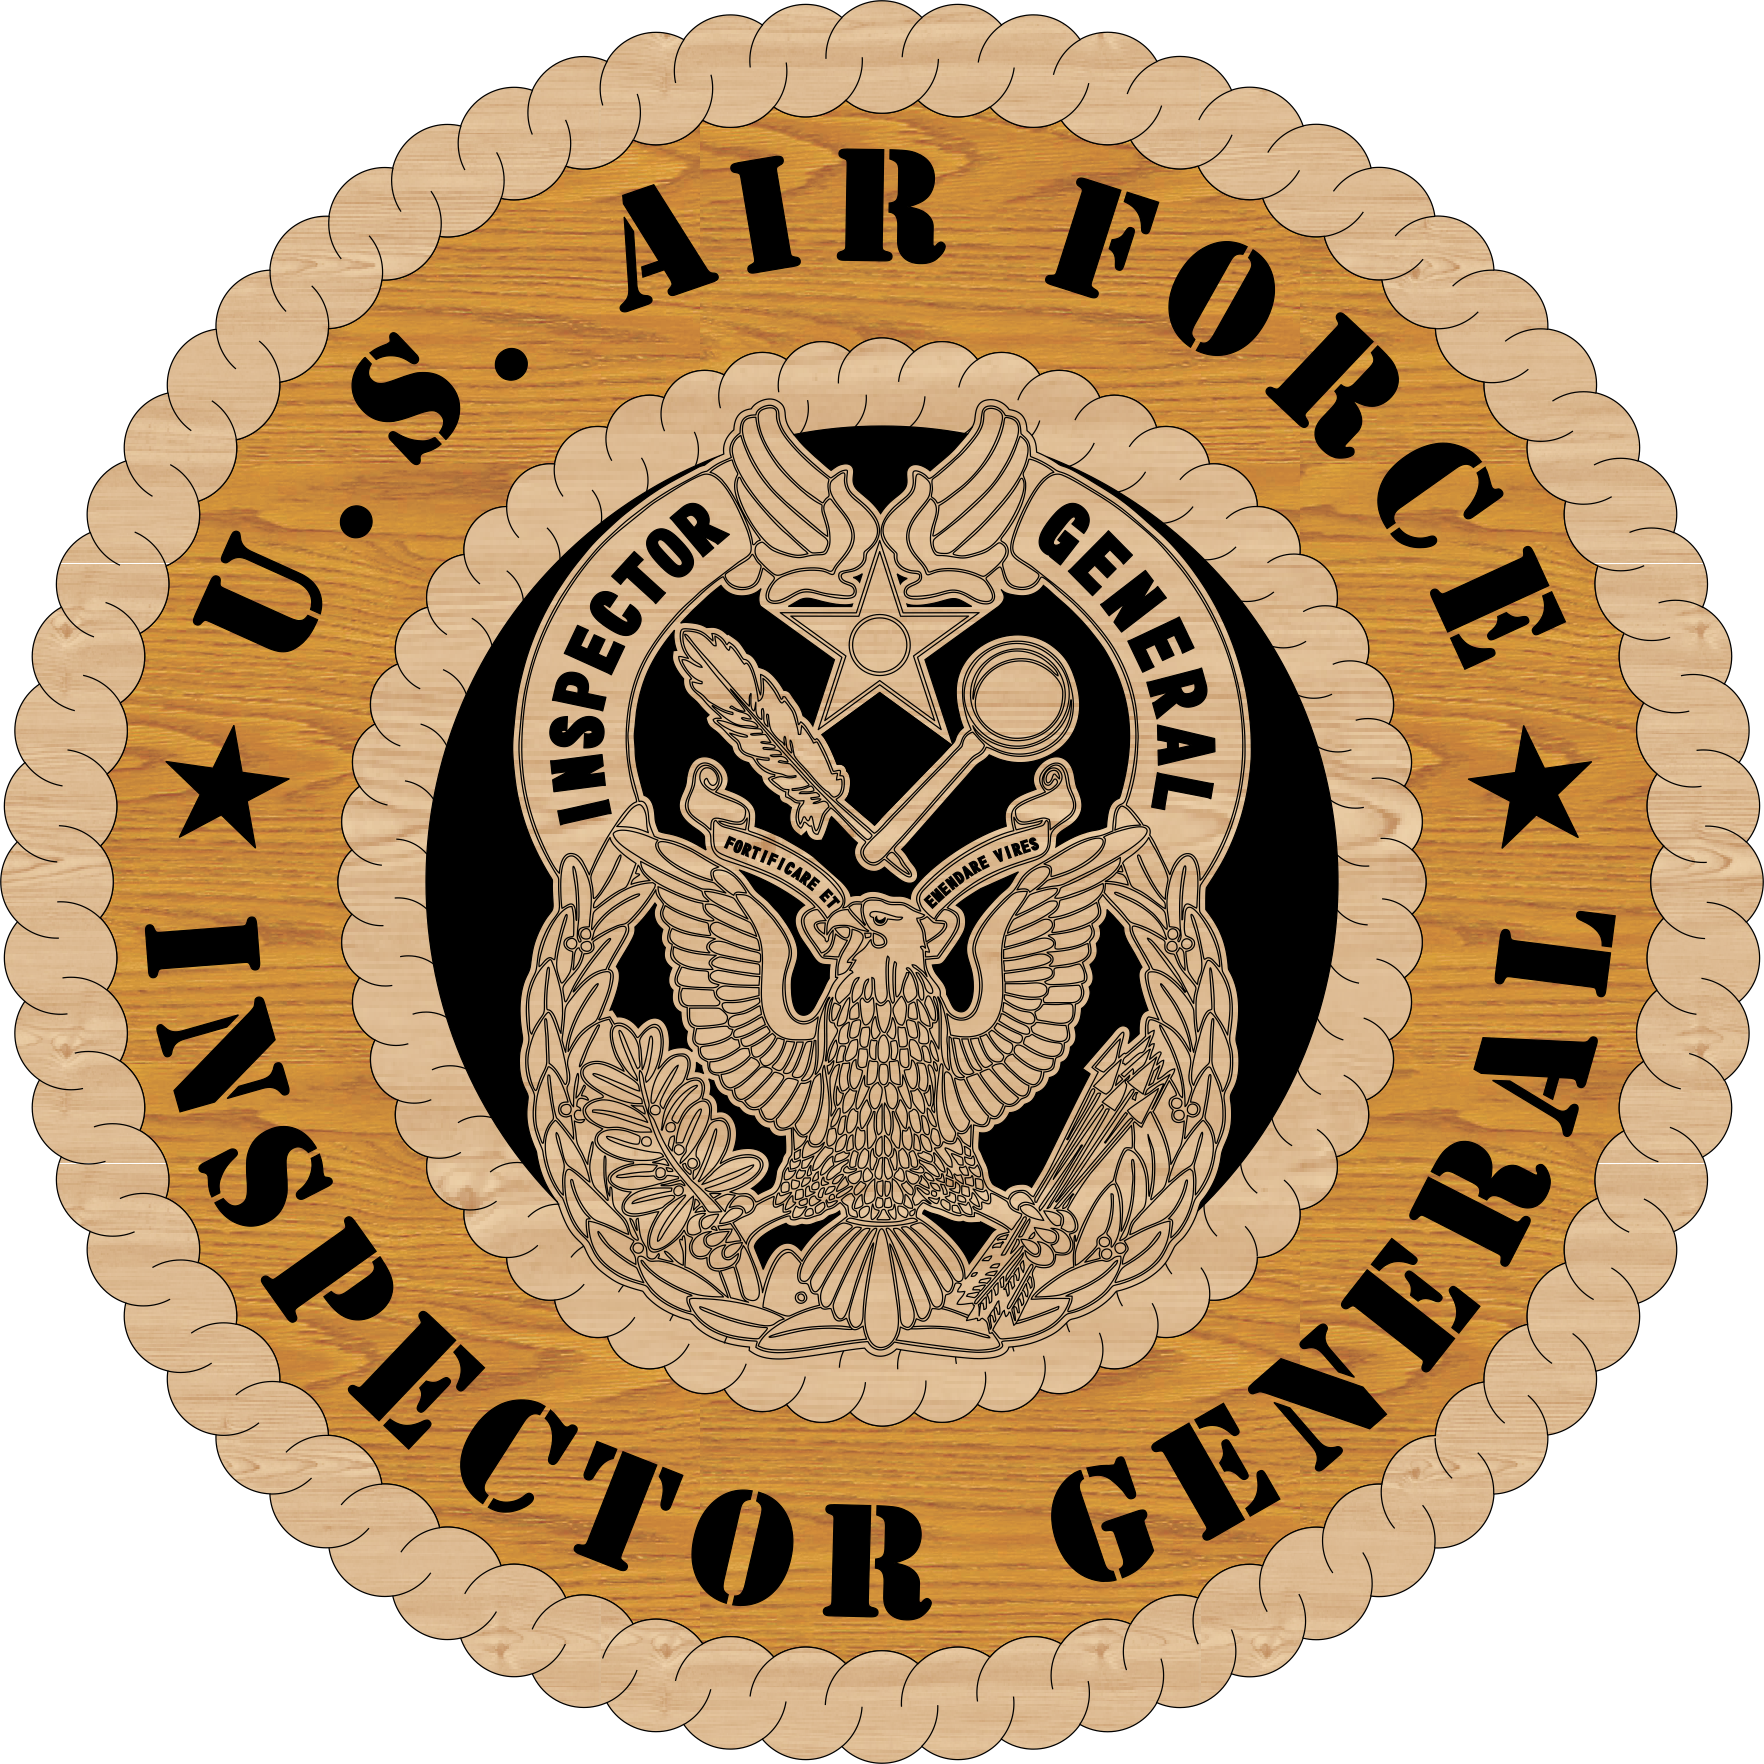 US AIR FORCE INSPECTOR GENERAL